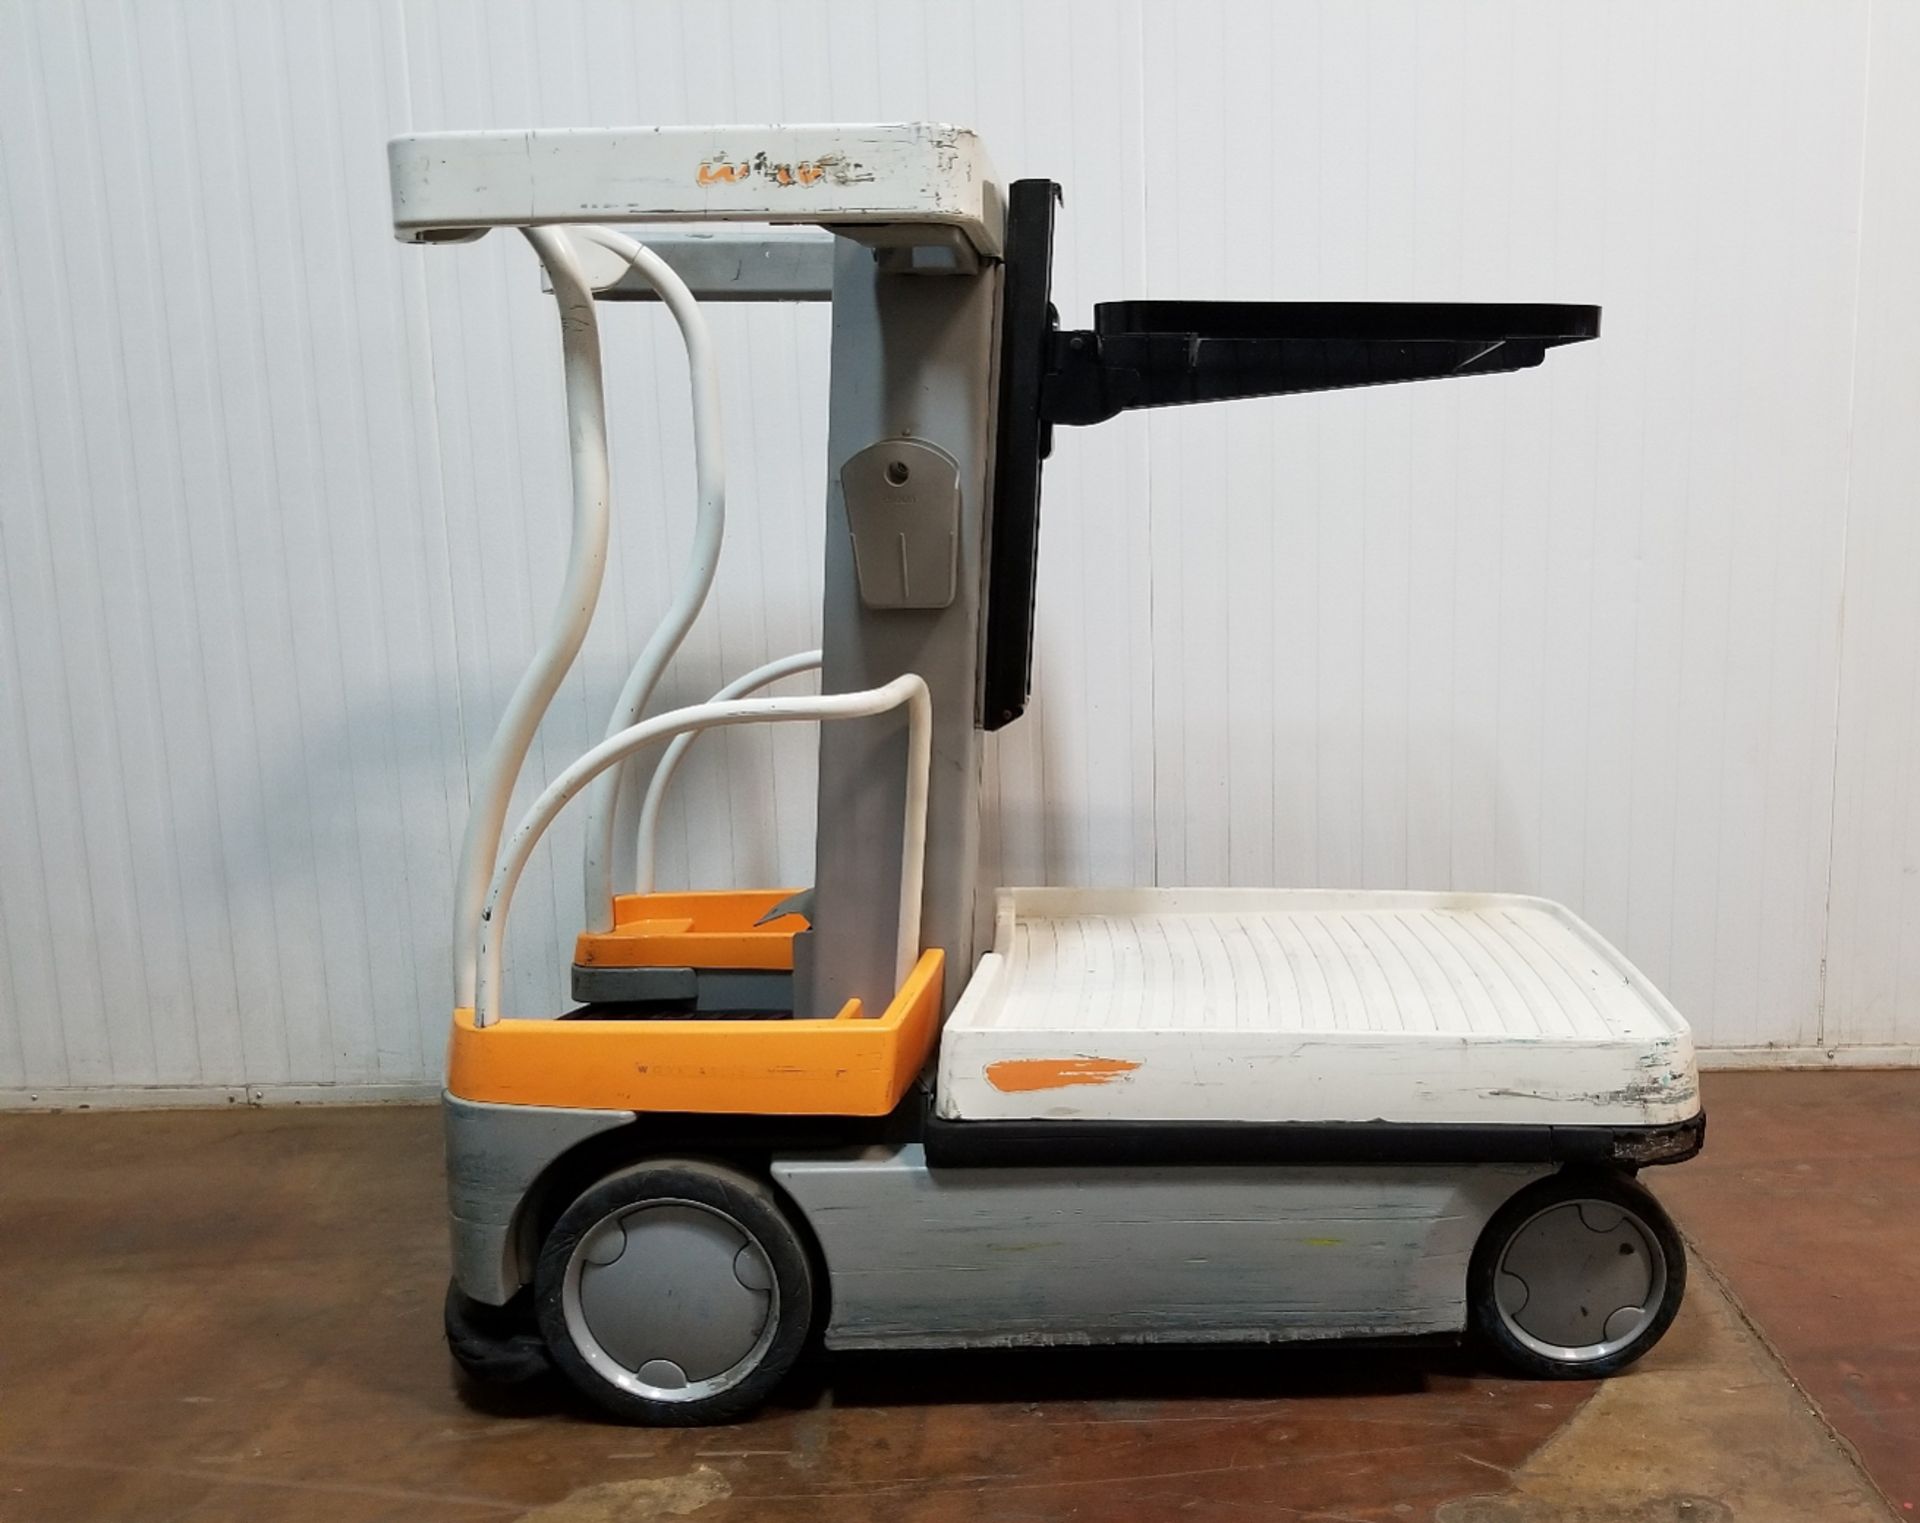 CROWN (2011) WAV50-118 24V ELECTRIC ORDER PICKER WITH 500 LB. CAPACITY, 118" MAX. LIFT HEIGHT, ON-